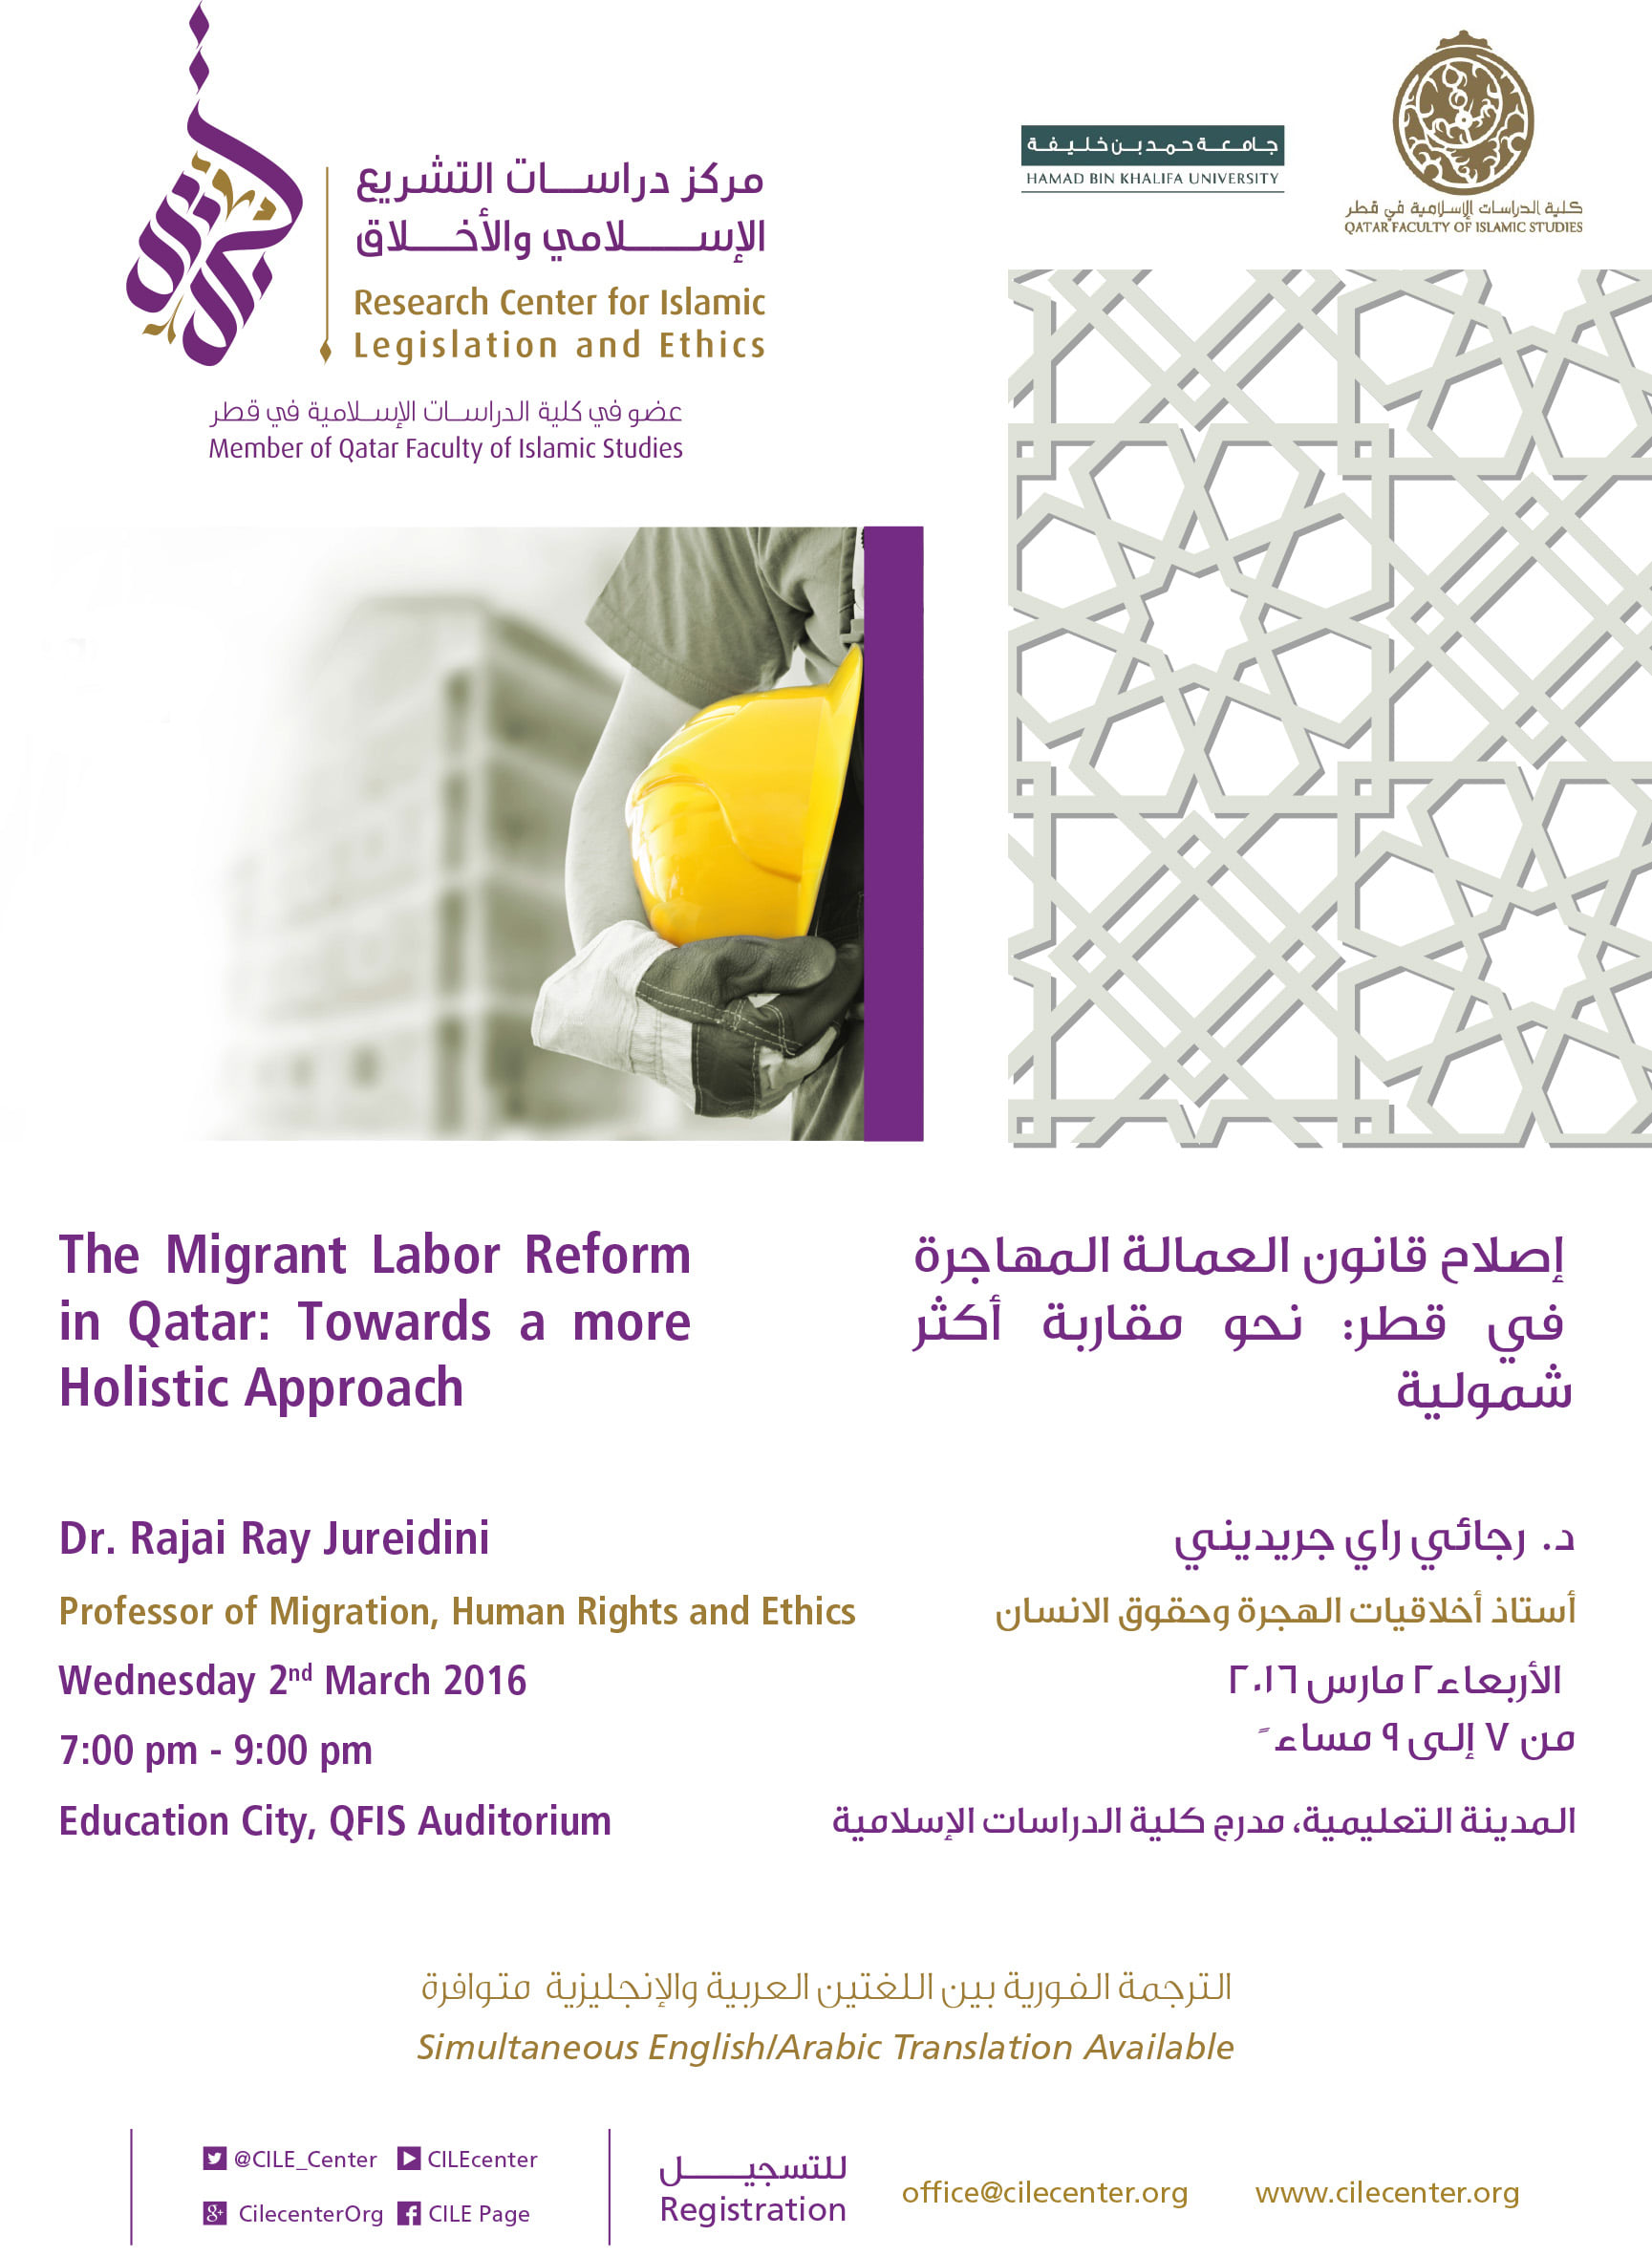 03/2016 The Migrant Labor Reform in Qatar: Towards a more Holistic Approach